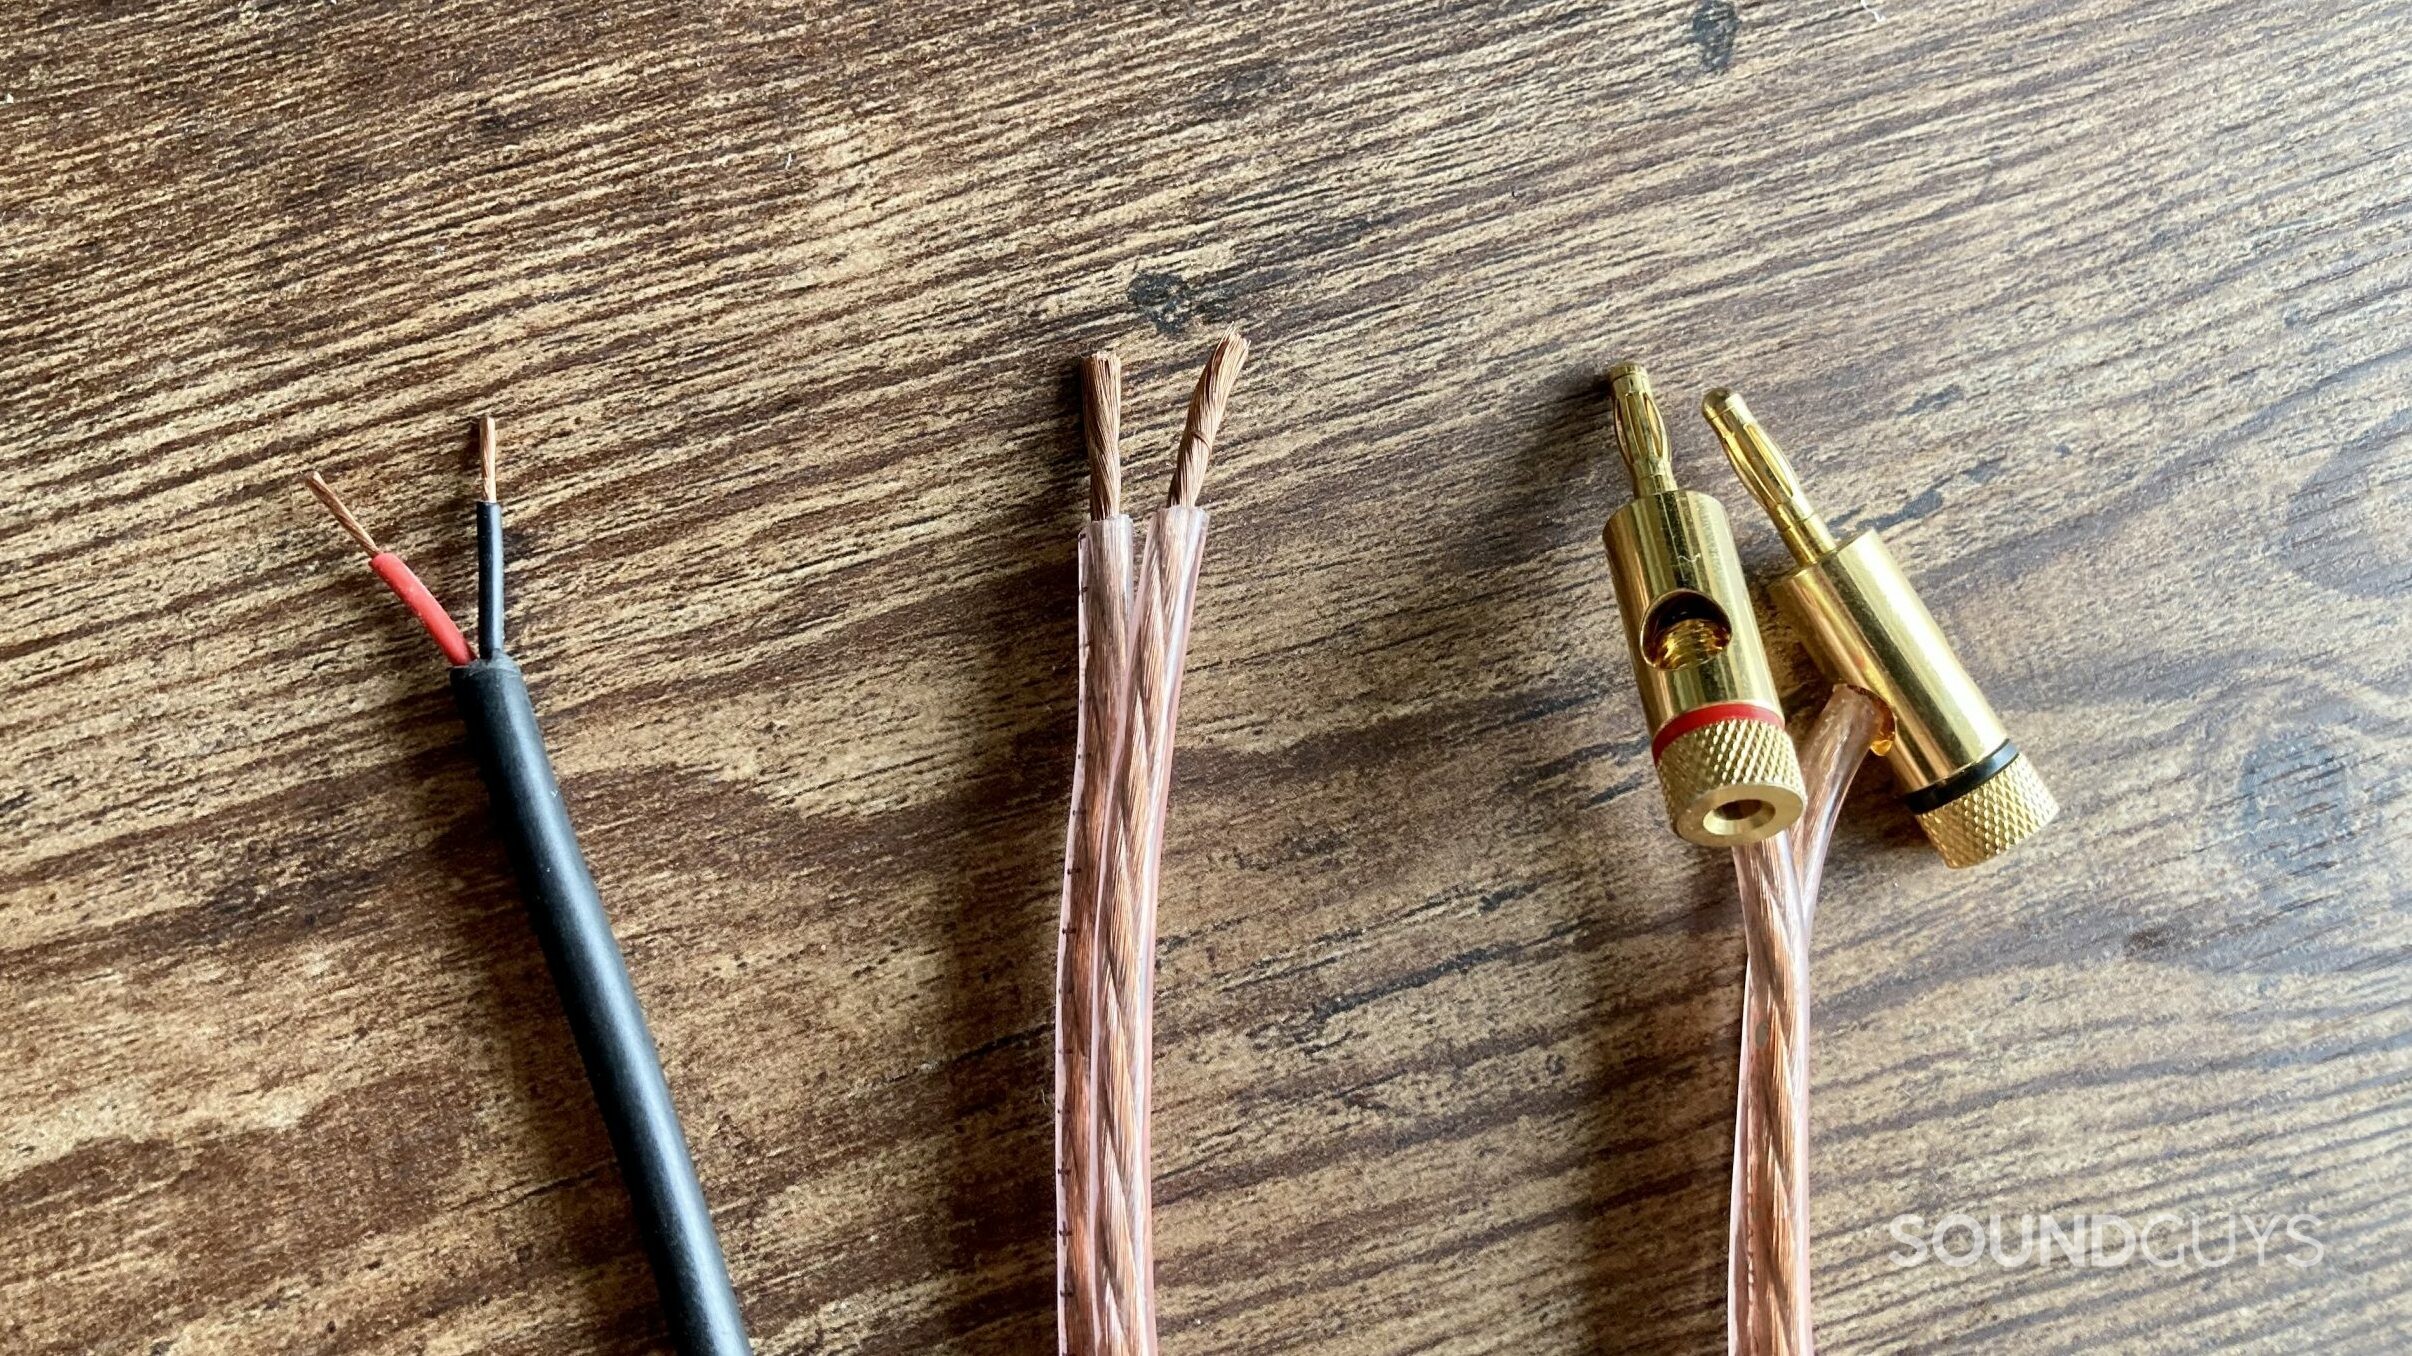 3 speaker cables showing bare end terminations, as well gold plated banana plugs.